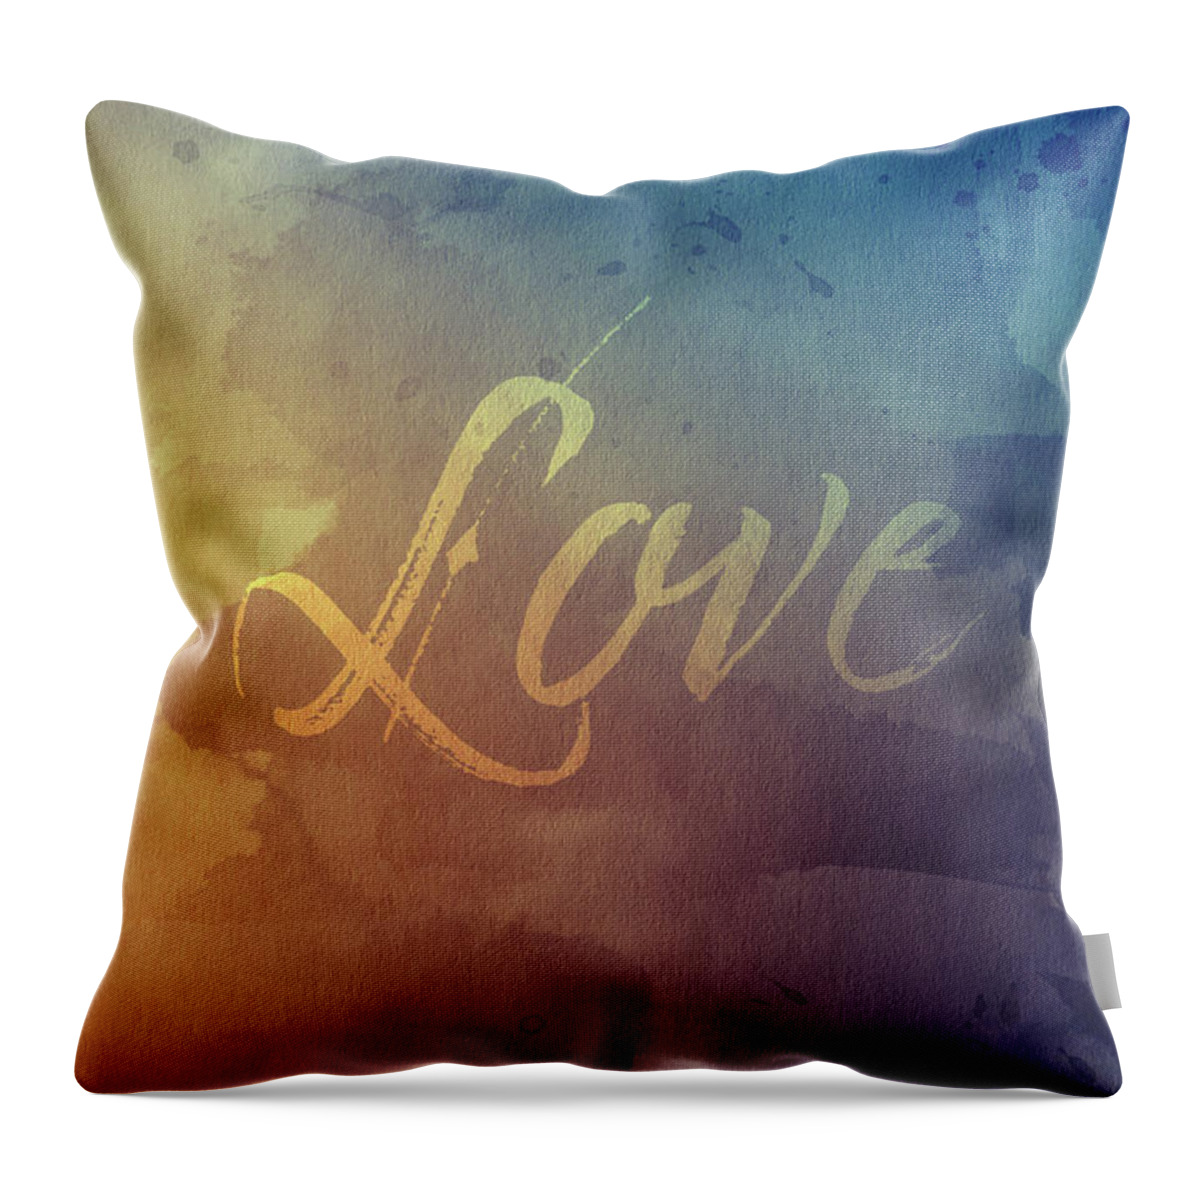 Watercolor Throw Pillow featuring the digital art Watercolor Art Love by Amelia Pearn